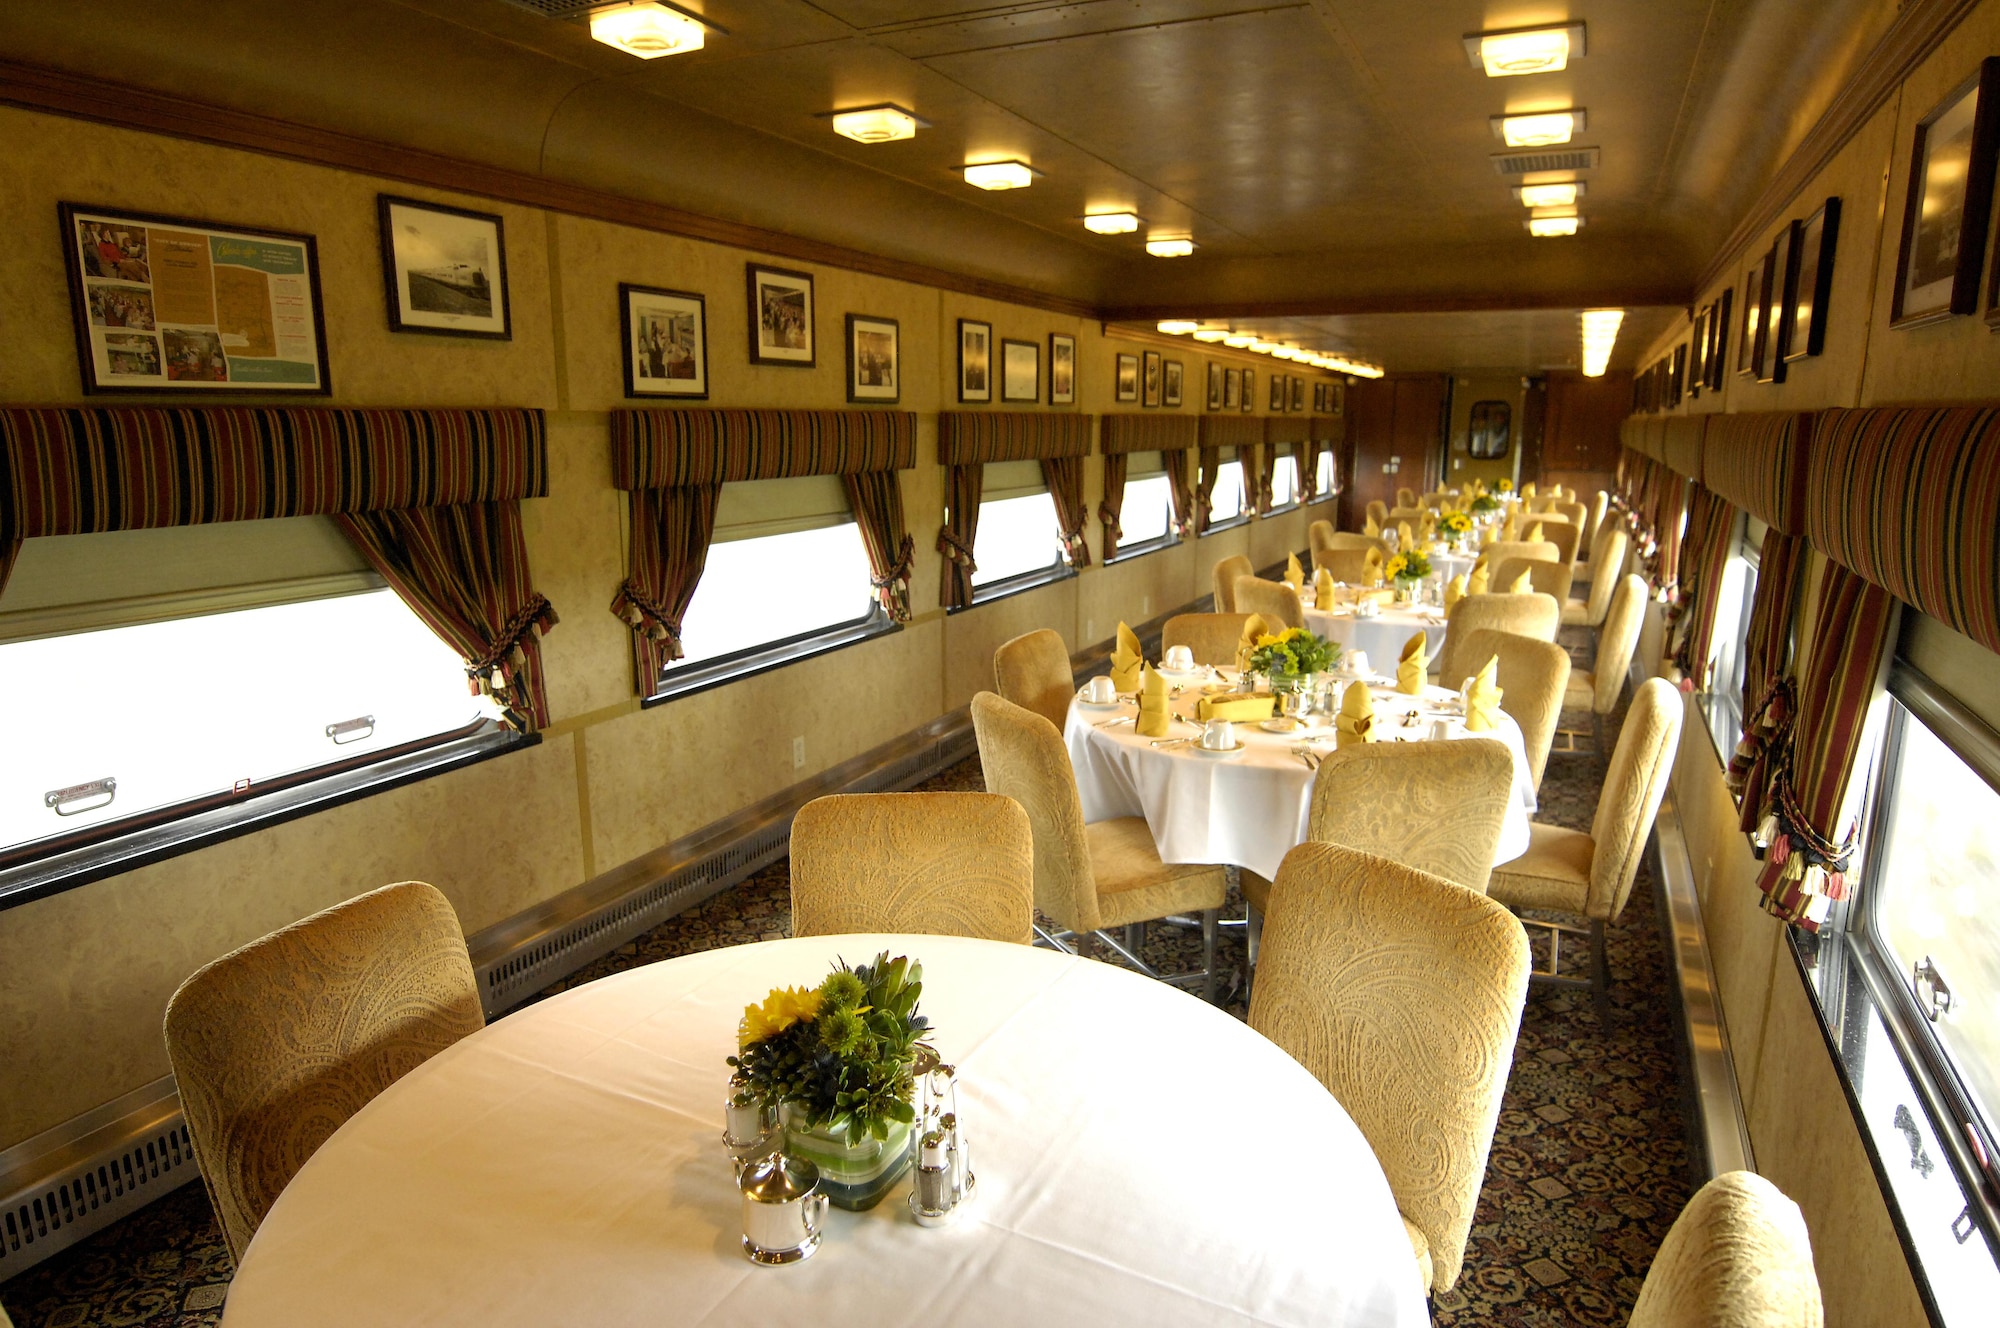 The "City of Denver," a flat diner car that is one of Union Pacific's historical Western Heritage Fleet of railcars. Members of Team Offutt were given a train ride to Grand Island, Neb. May 27 where they learned about UP and the company's mission. (U.S. Air Force photo by Delanie Stafford)